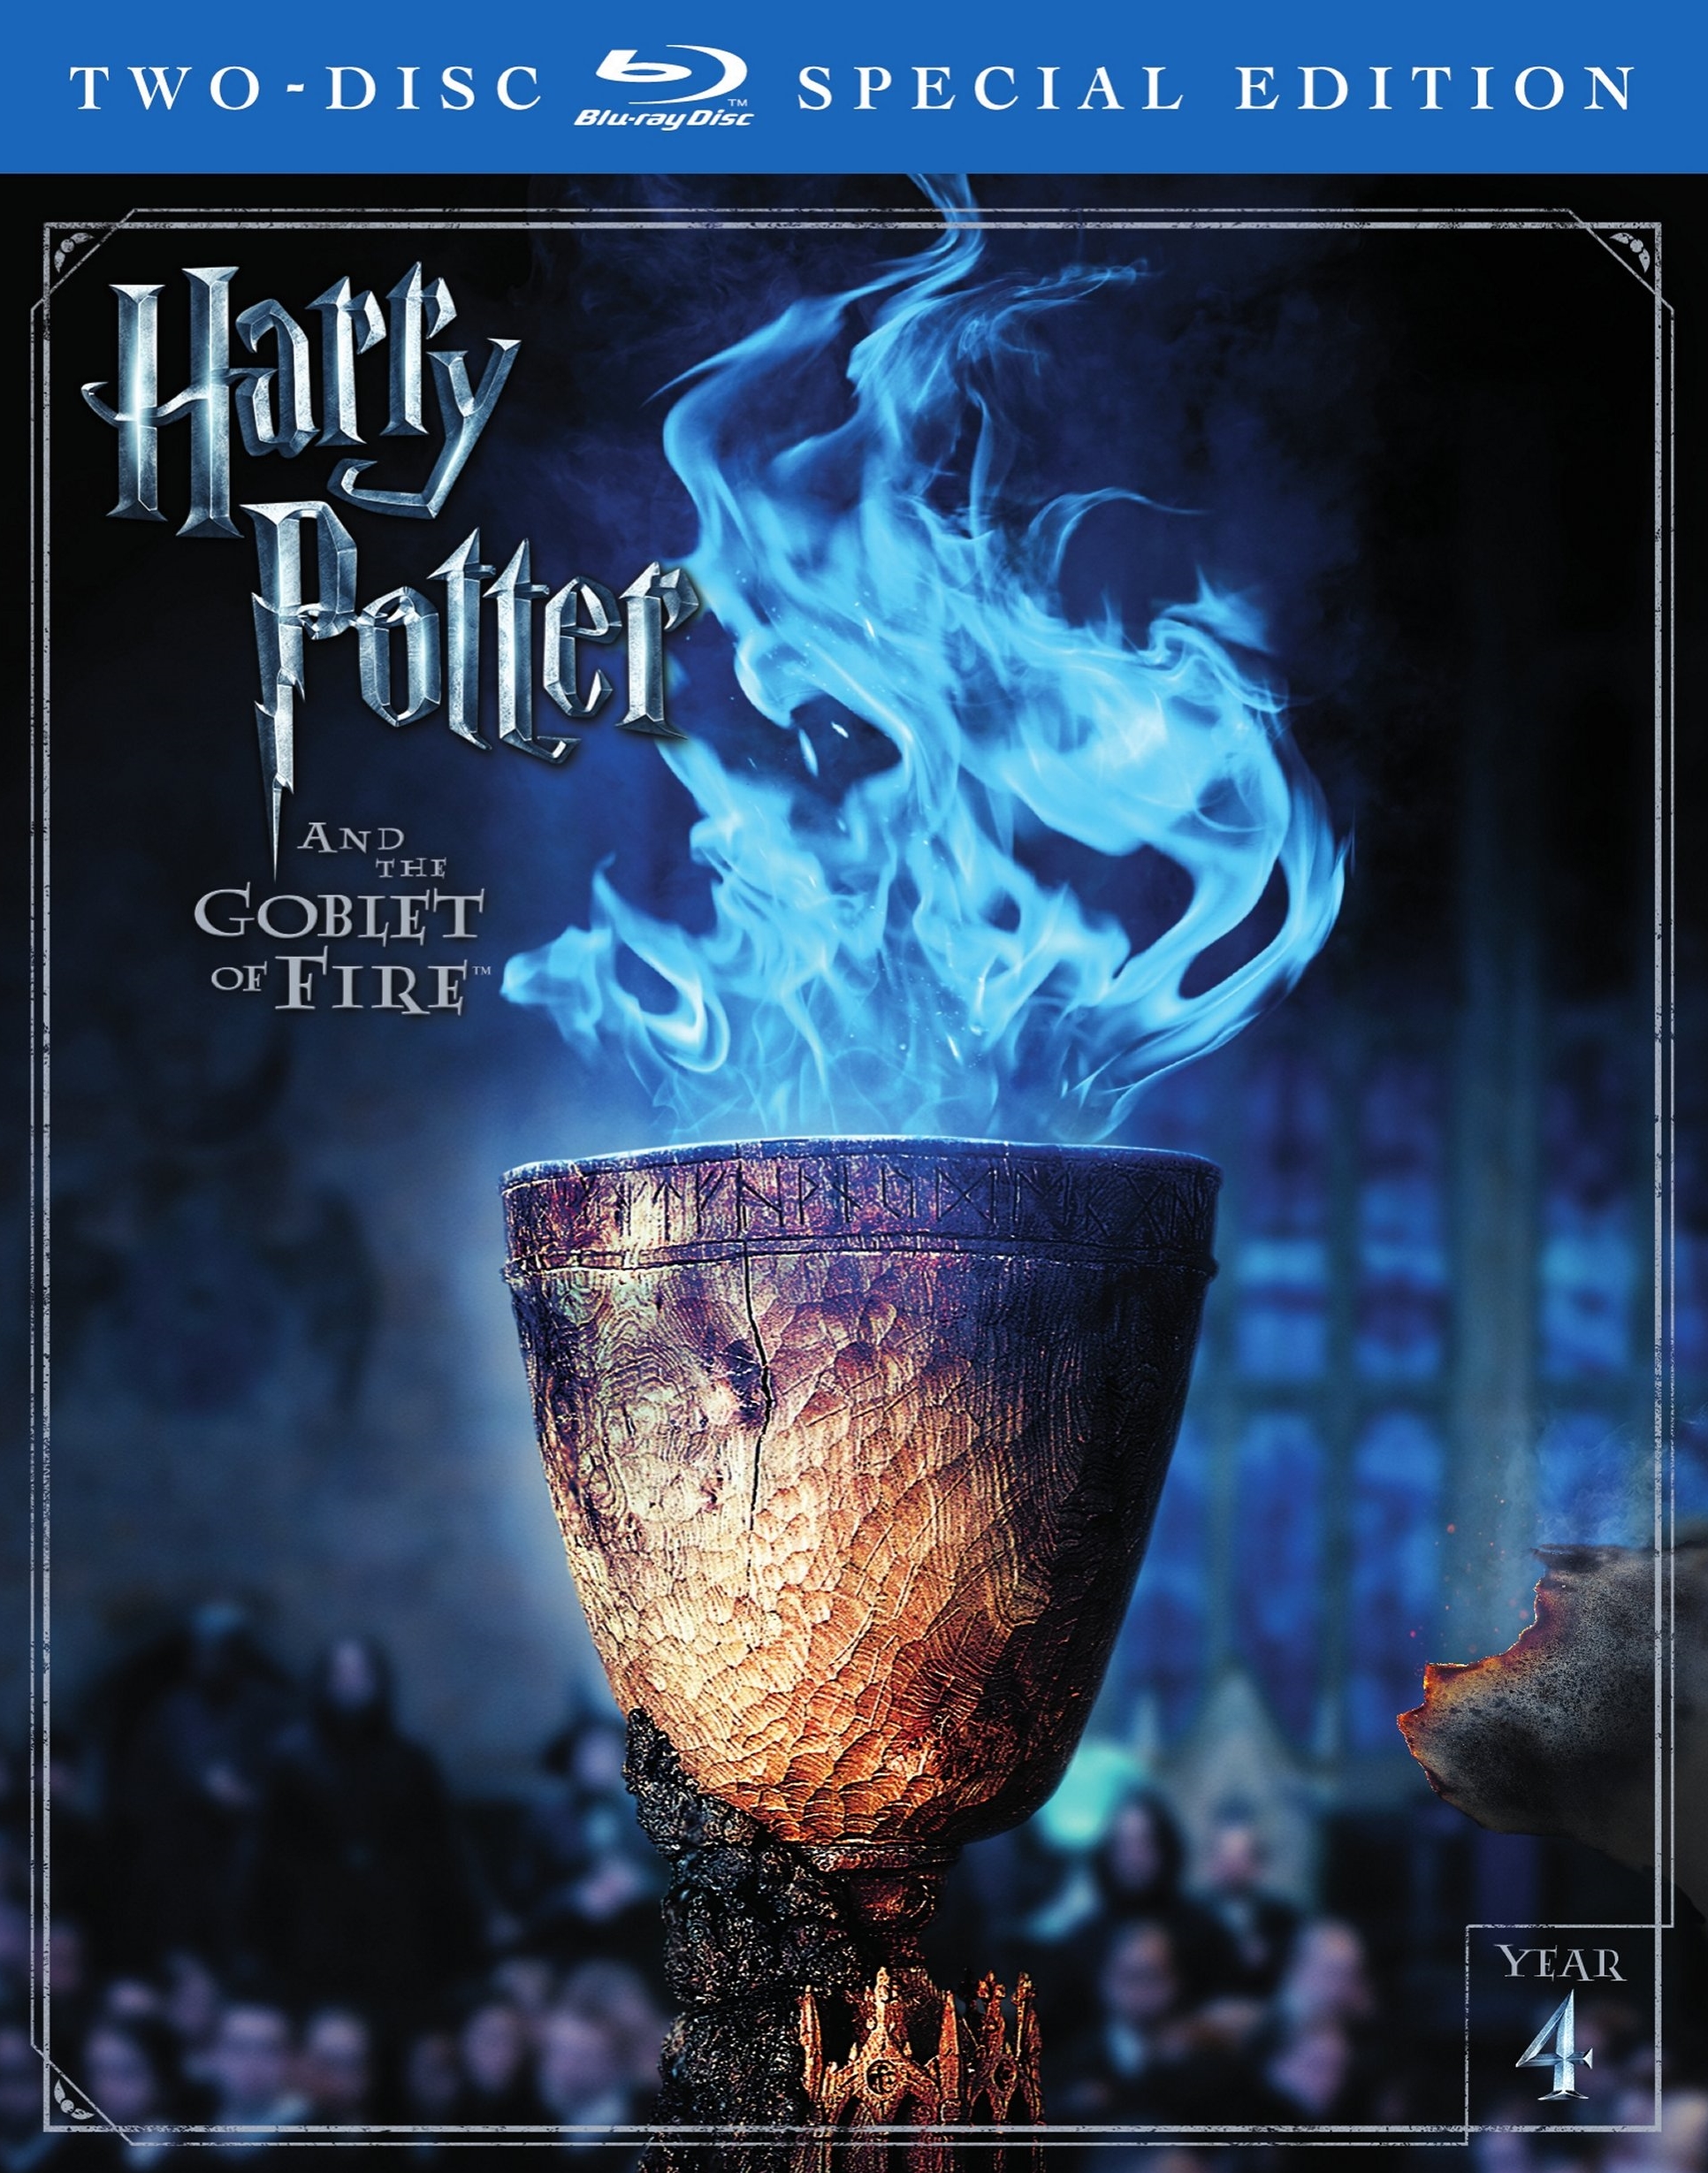 Harry Potter and the Goblet of Fire [Blu-ray] [2 Discs] [2005] - Best Buy